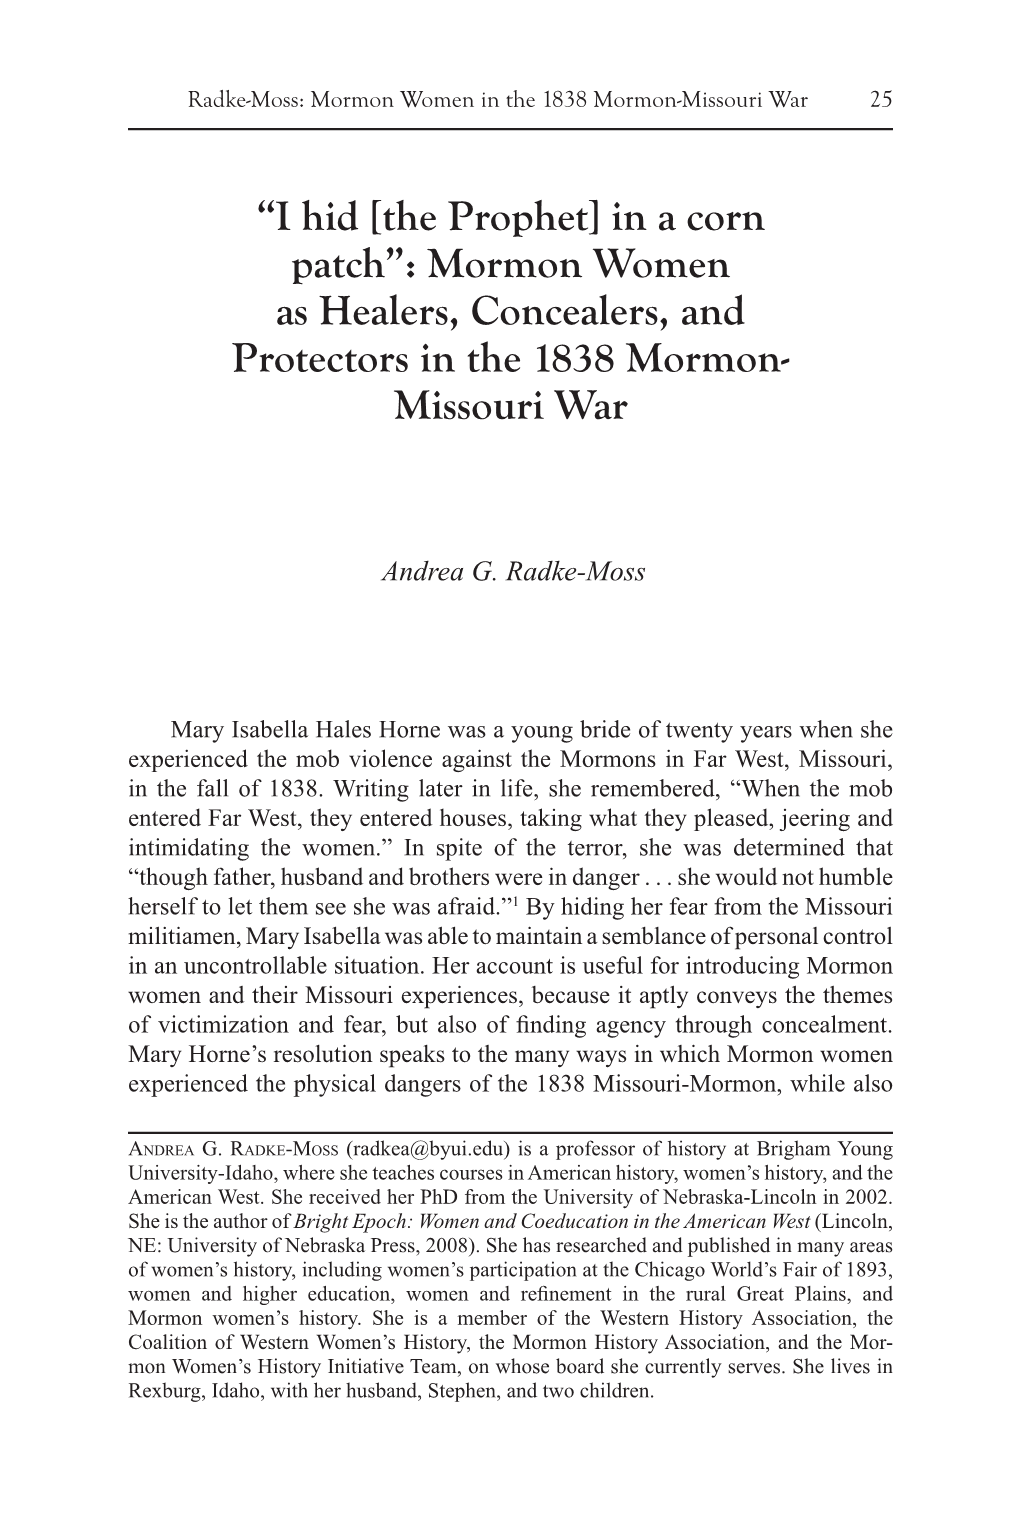 I Hid [The Prophet] in a Corn Patch”: Mormon Women As Healers, Concealers, and Protectors in the 1838 Mormon- Missouri War